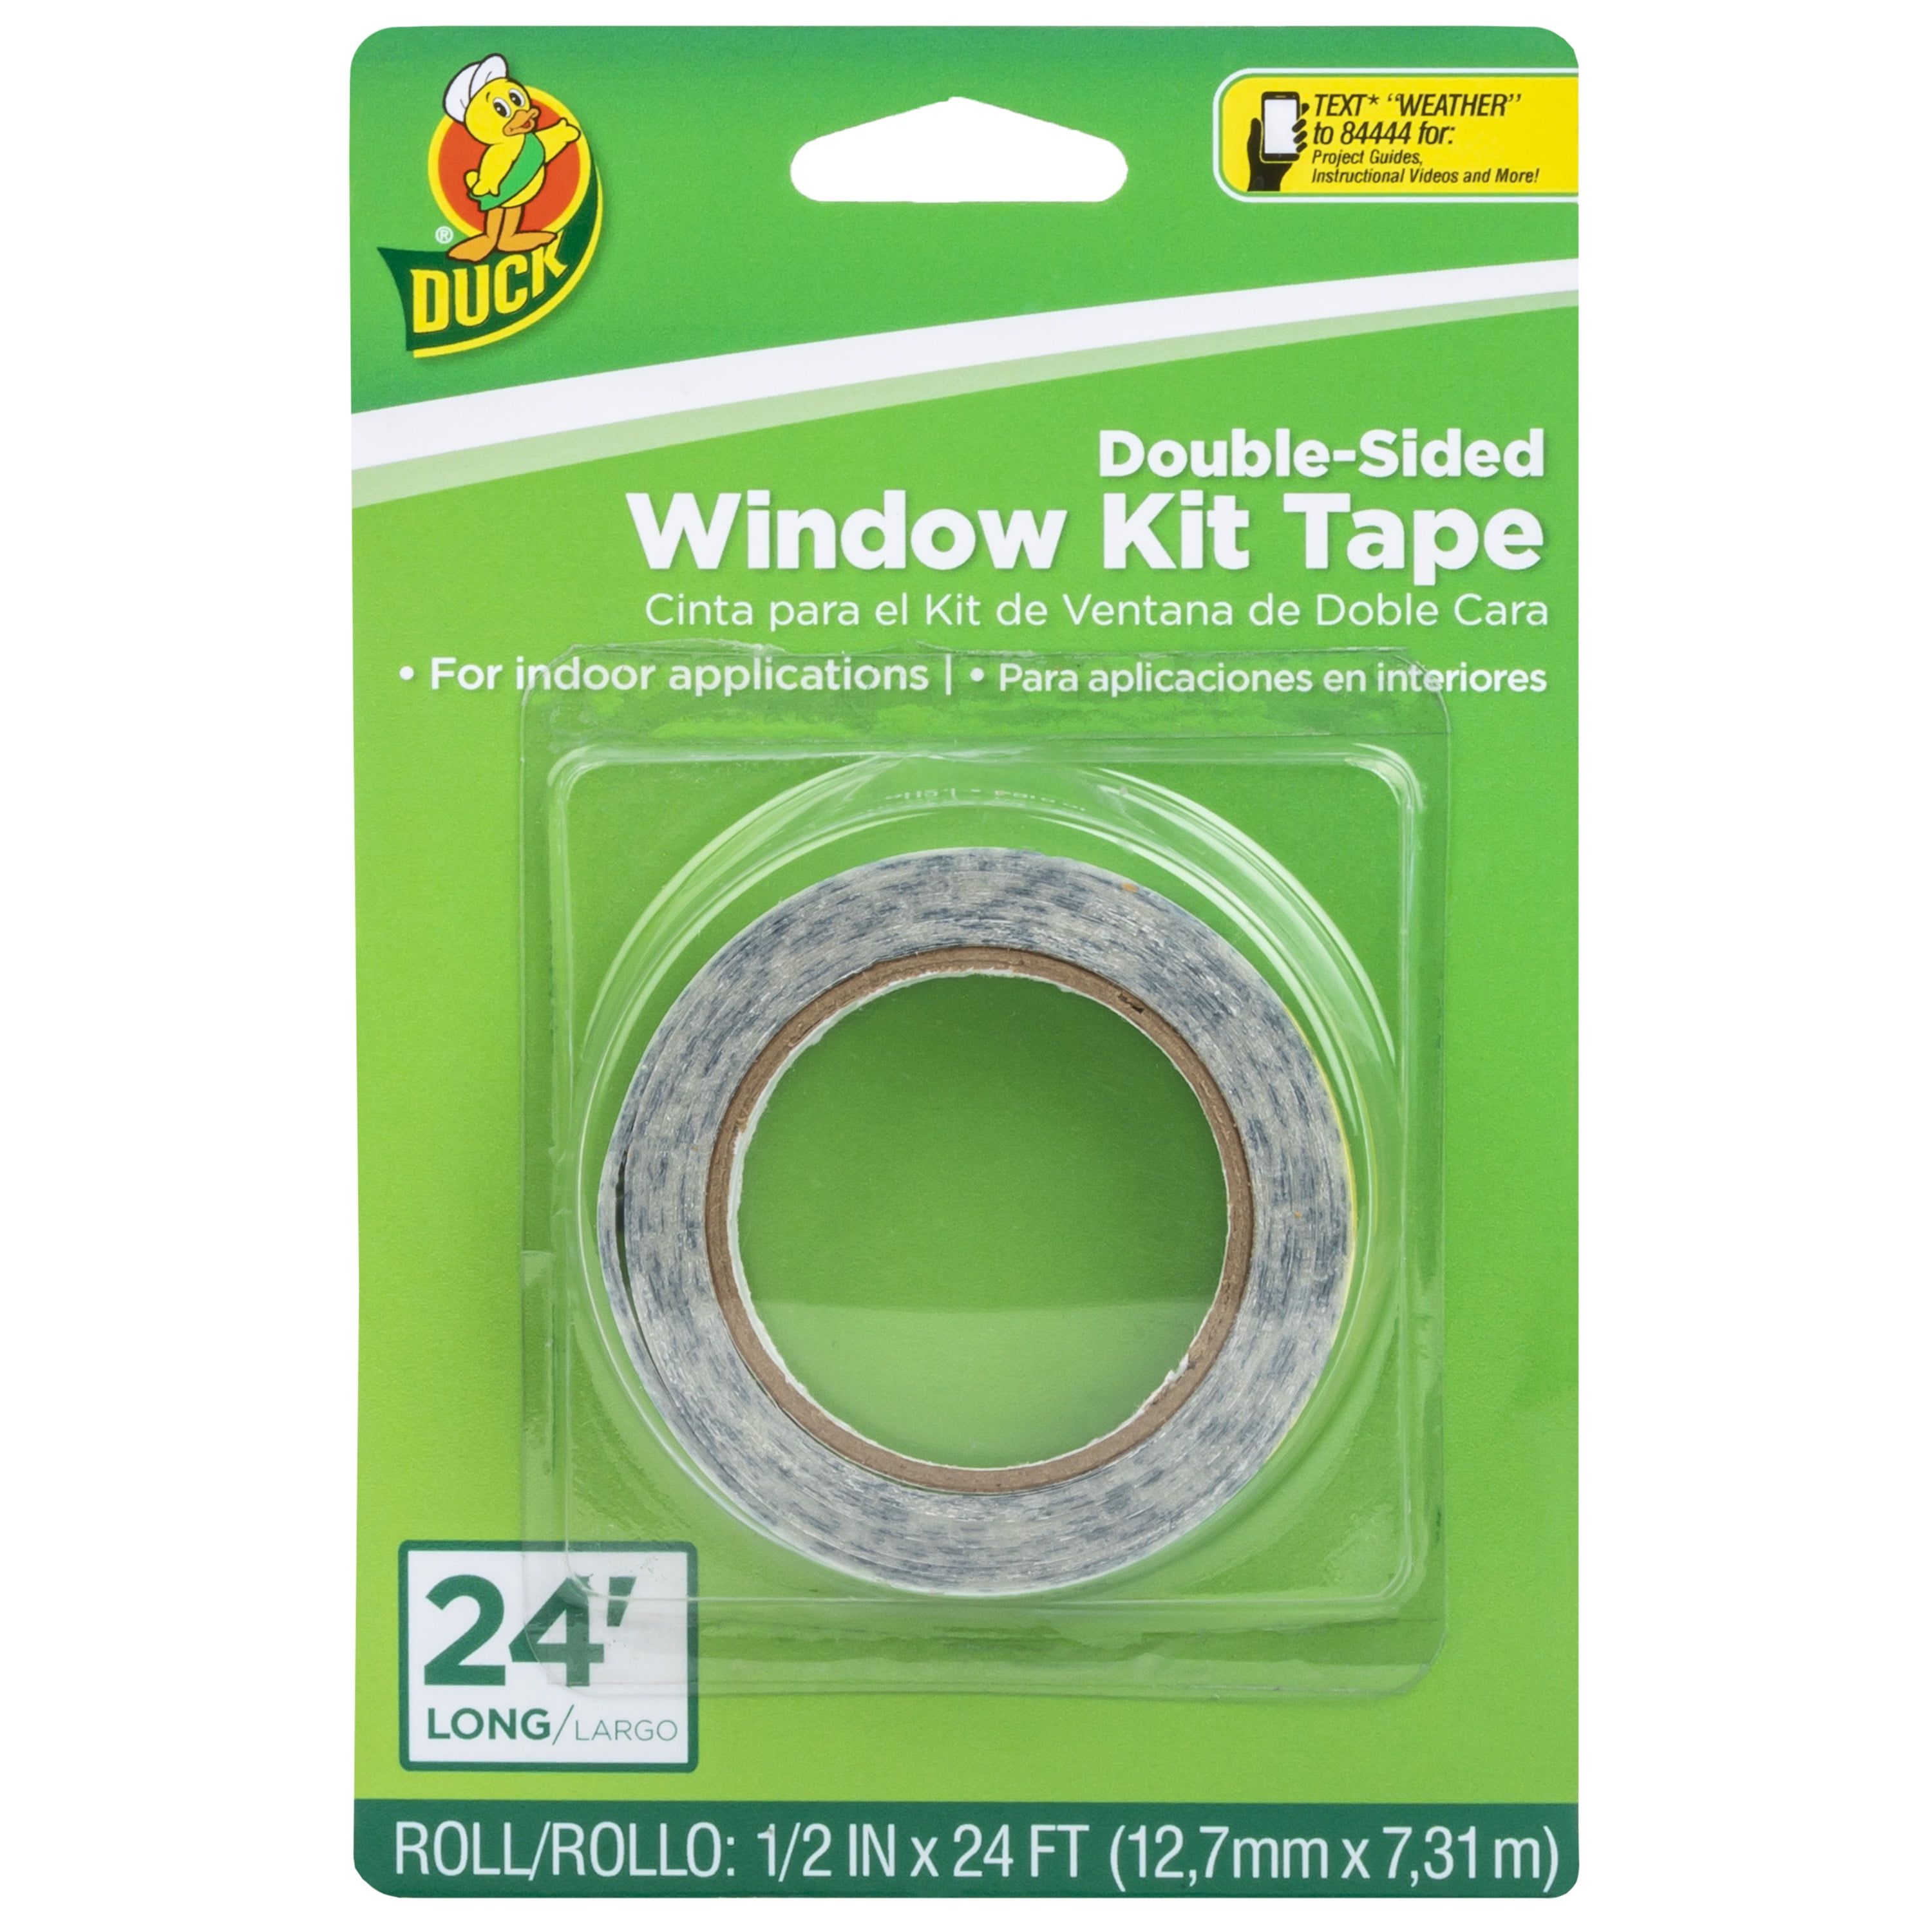 2 Rolls Transparent Double-Sided Window Insulating Tape 